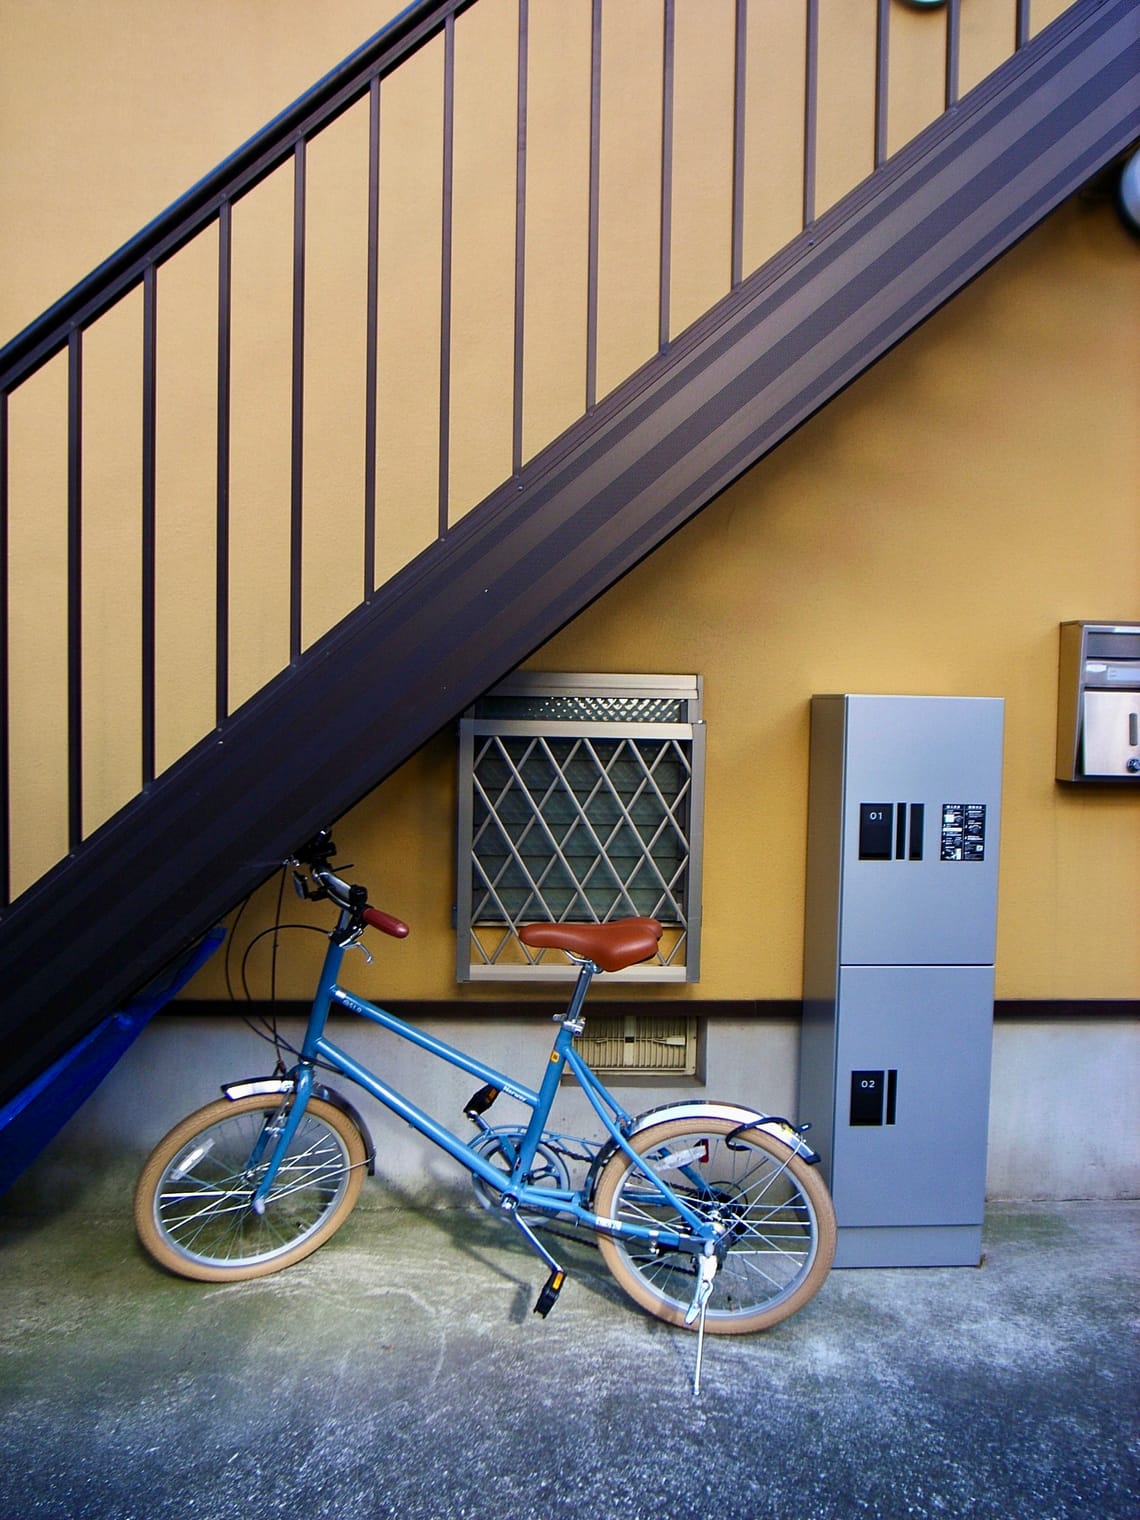 A blue bicycle sits beneath a flight of stairs, which cuts a khaki wall in a dramatic diagonal.